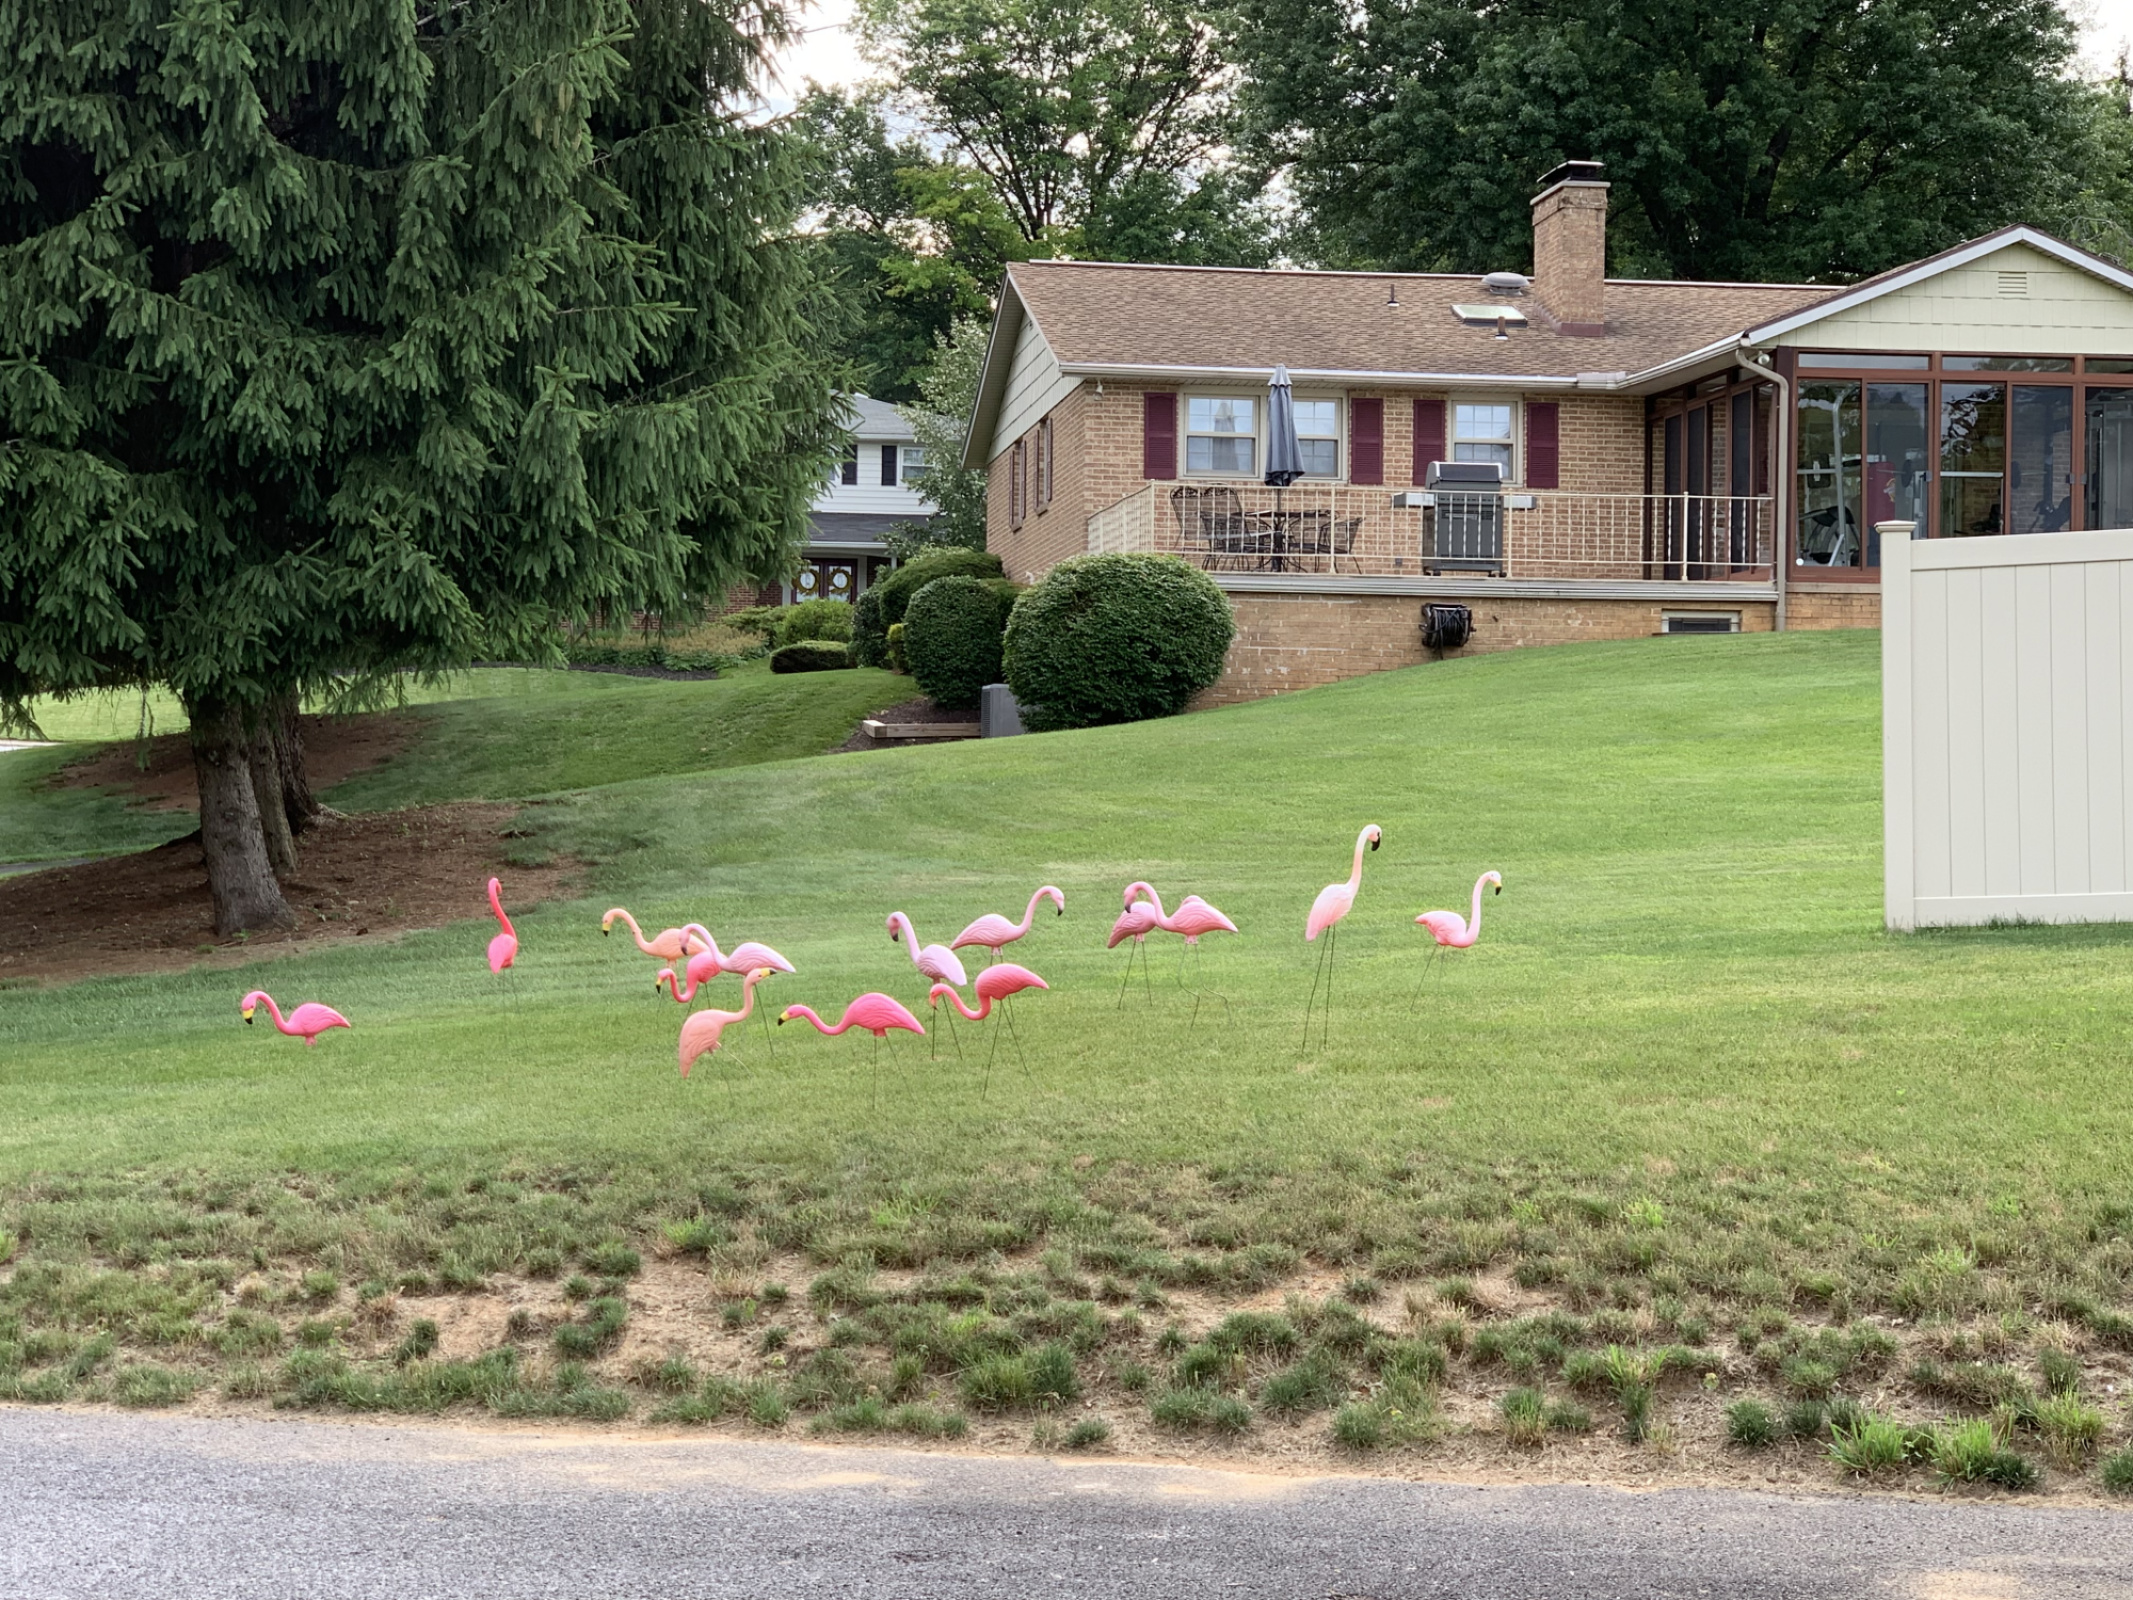 We were flocked today!  ❤️ It and could use a good laugh 